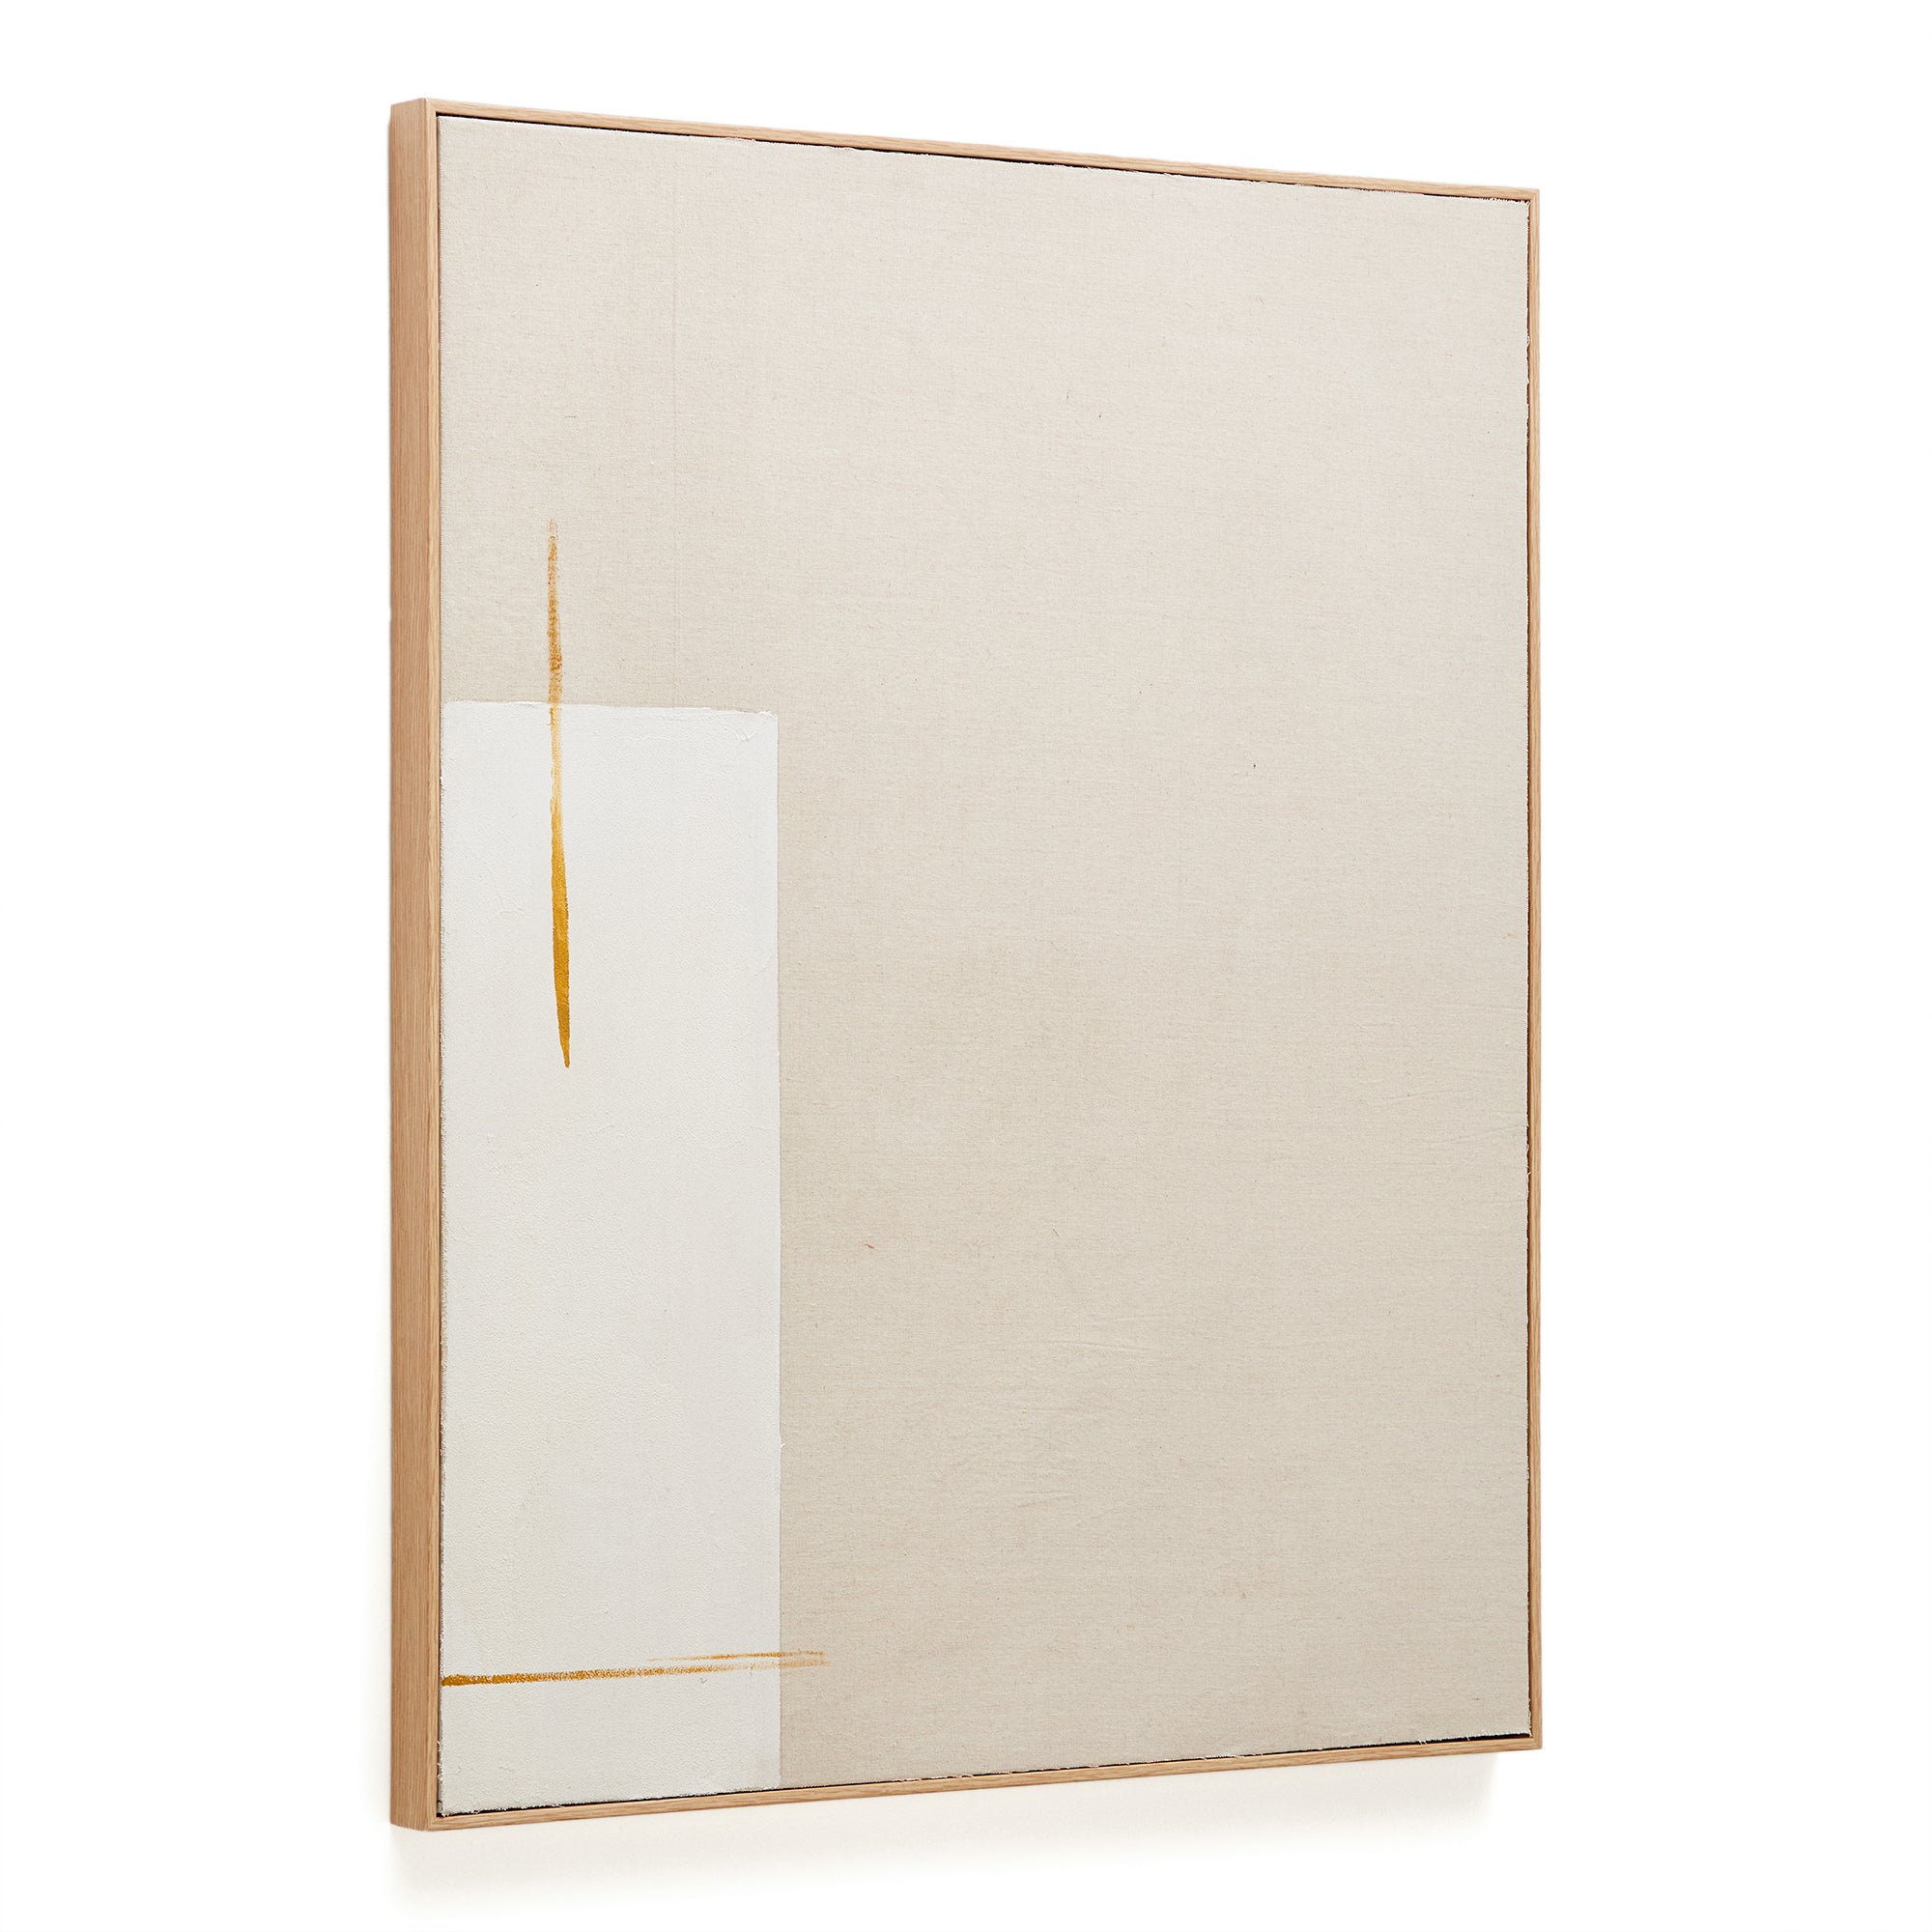 Salin abstract painting with vertical beige canvas strip 80 x 100 cm